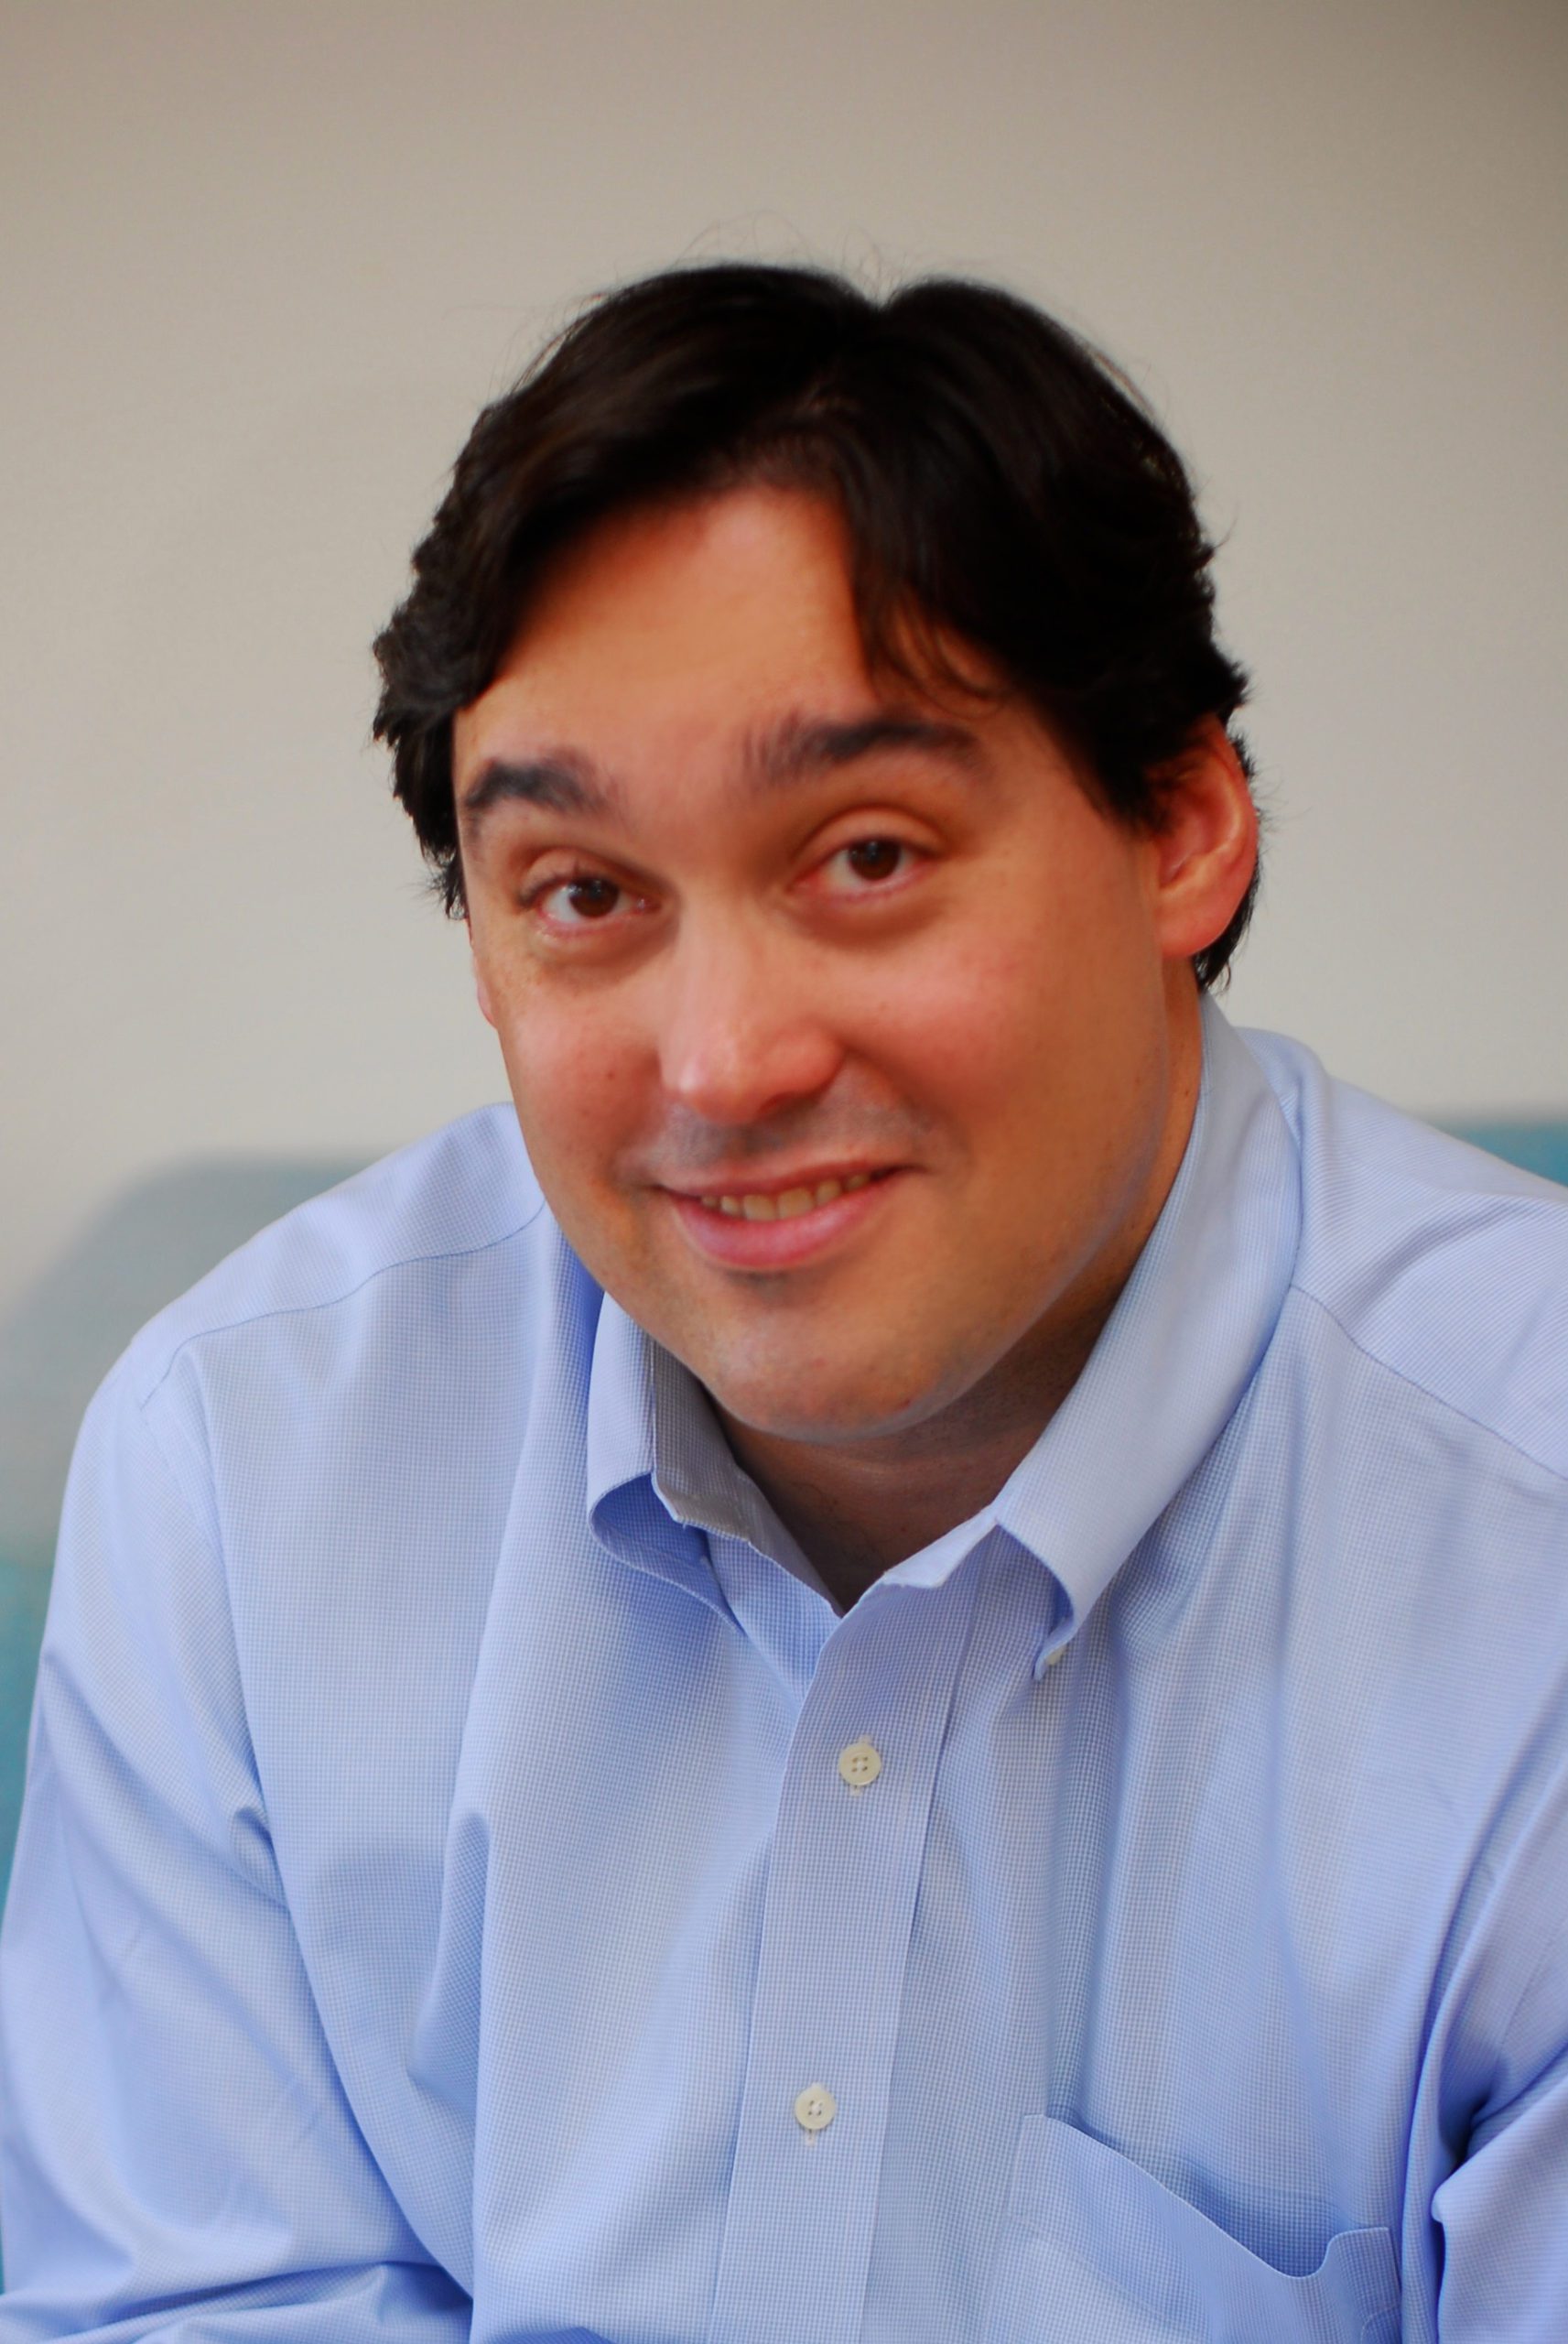 Image of Neil Fried from DigitalFrontiers Advocacy website